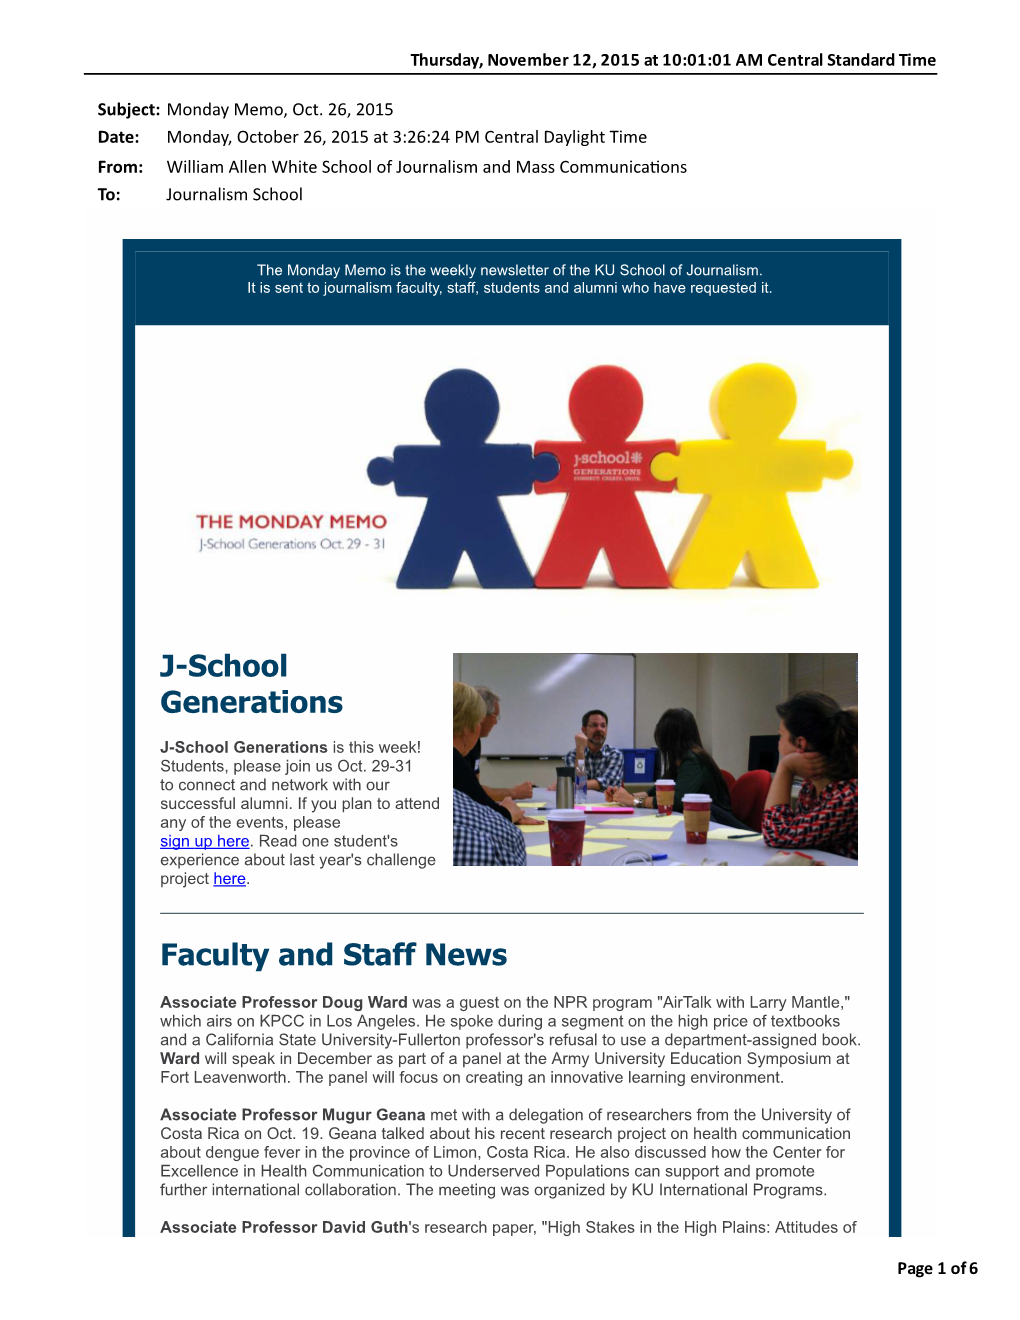 J-School Generations Faculty and Staff News